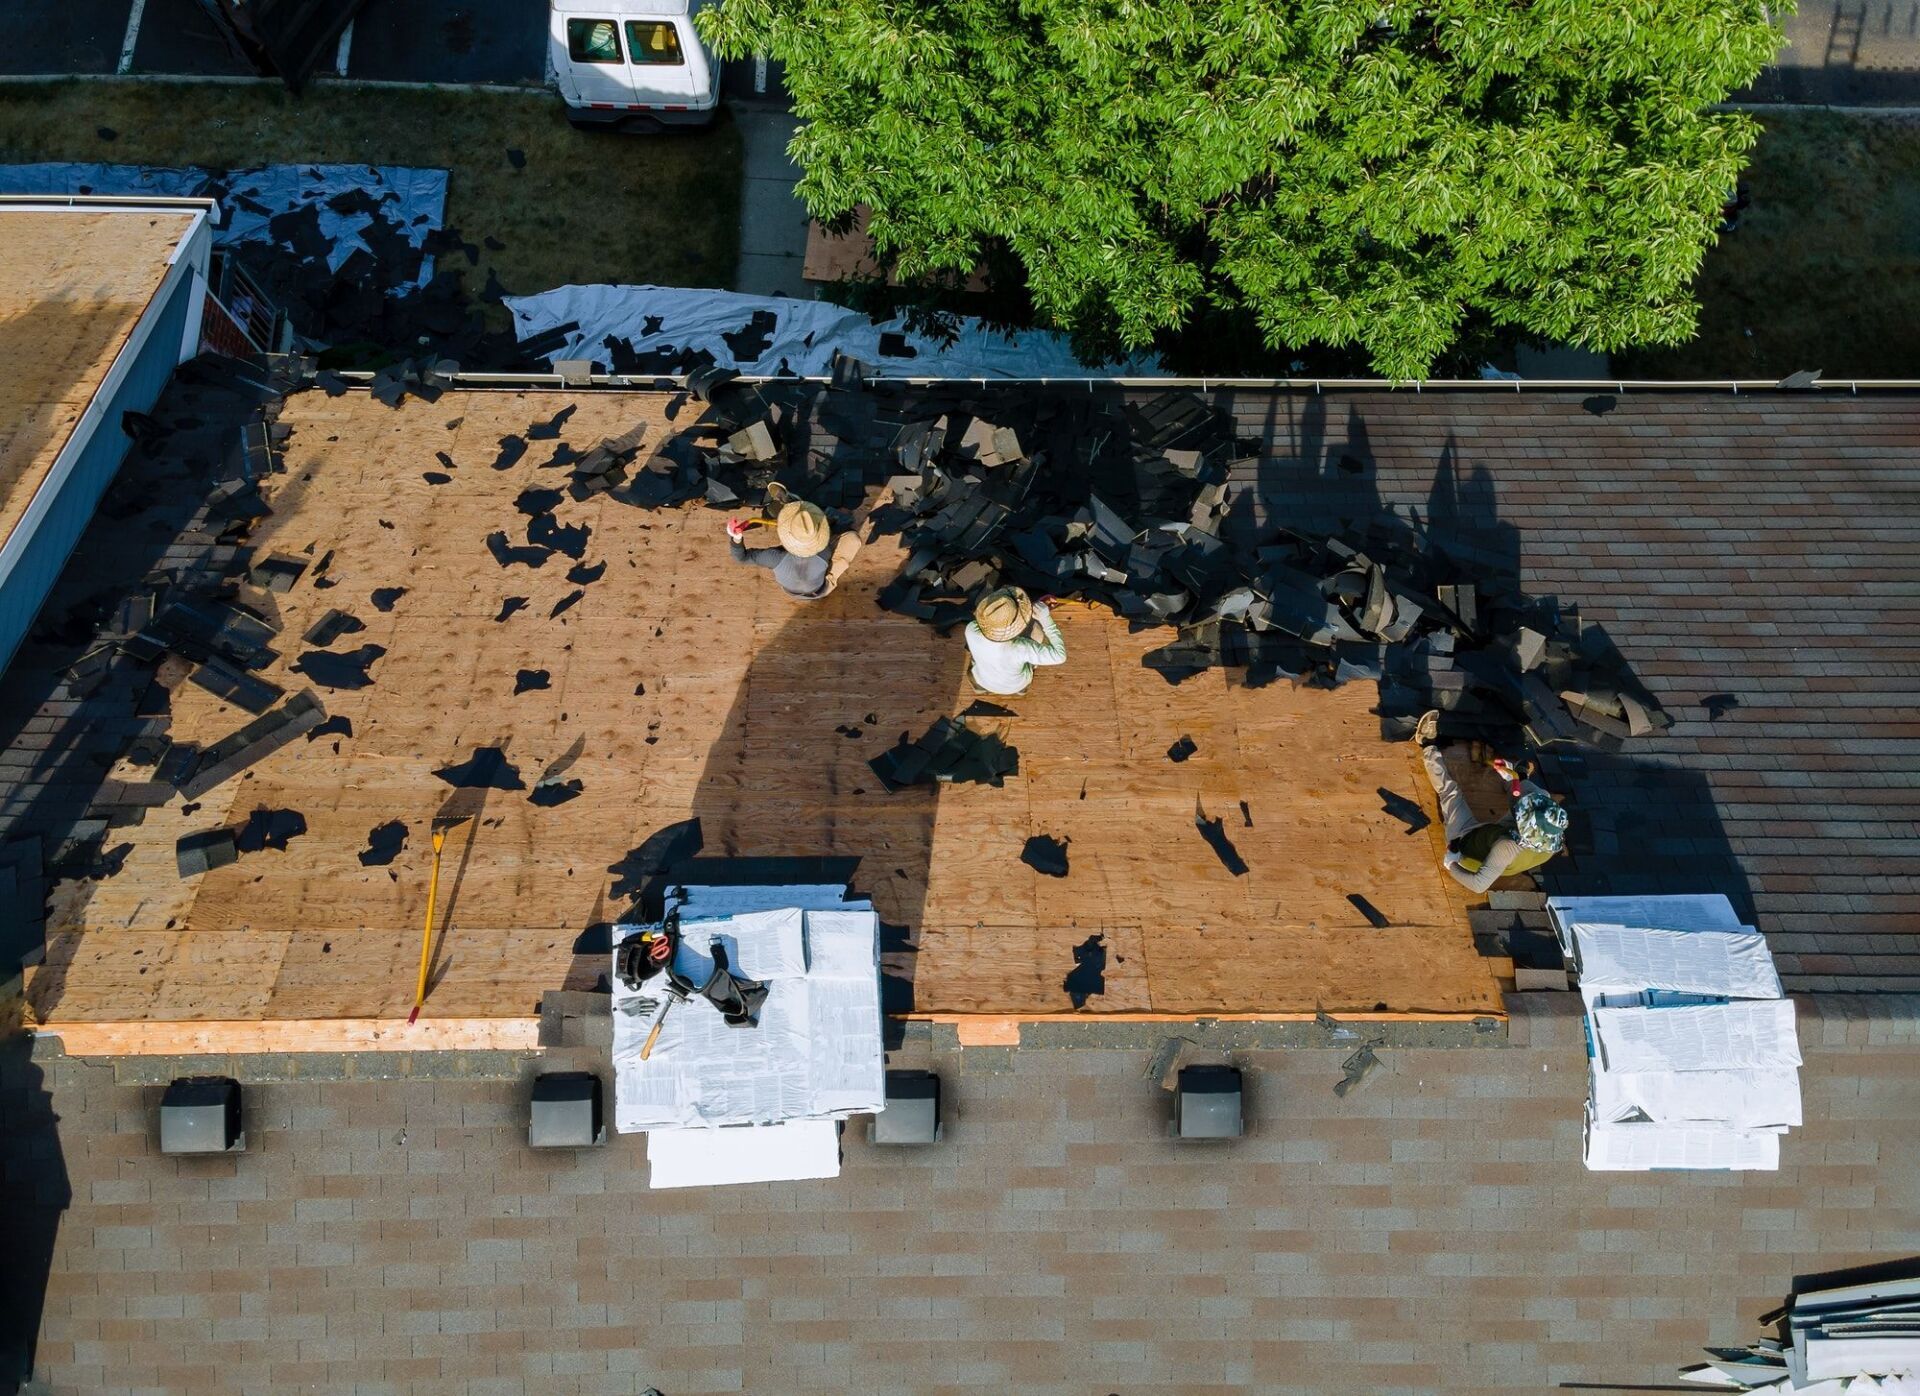 An aerial view of a roof being repaired.